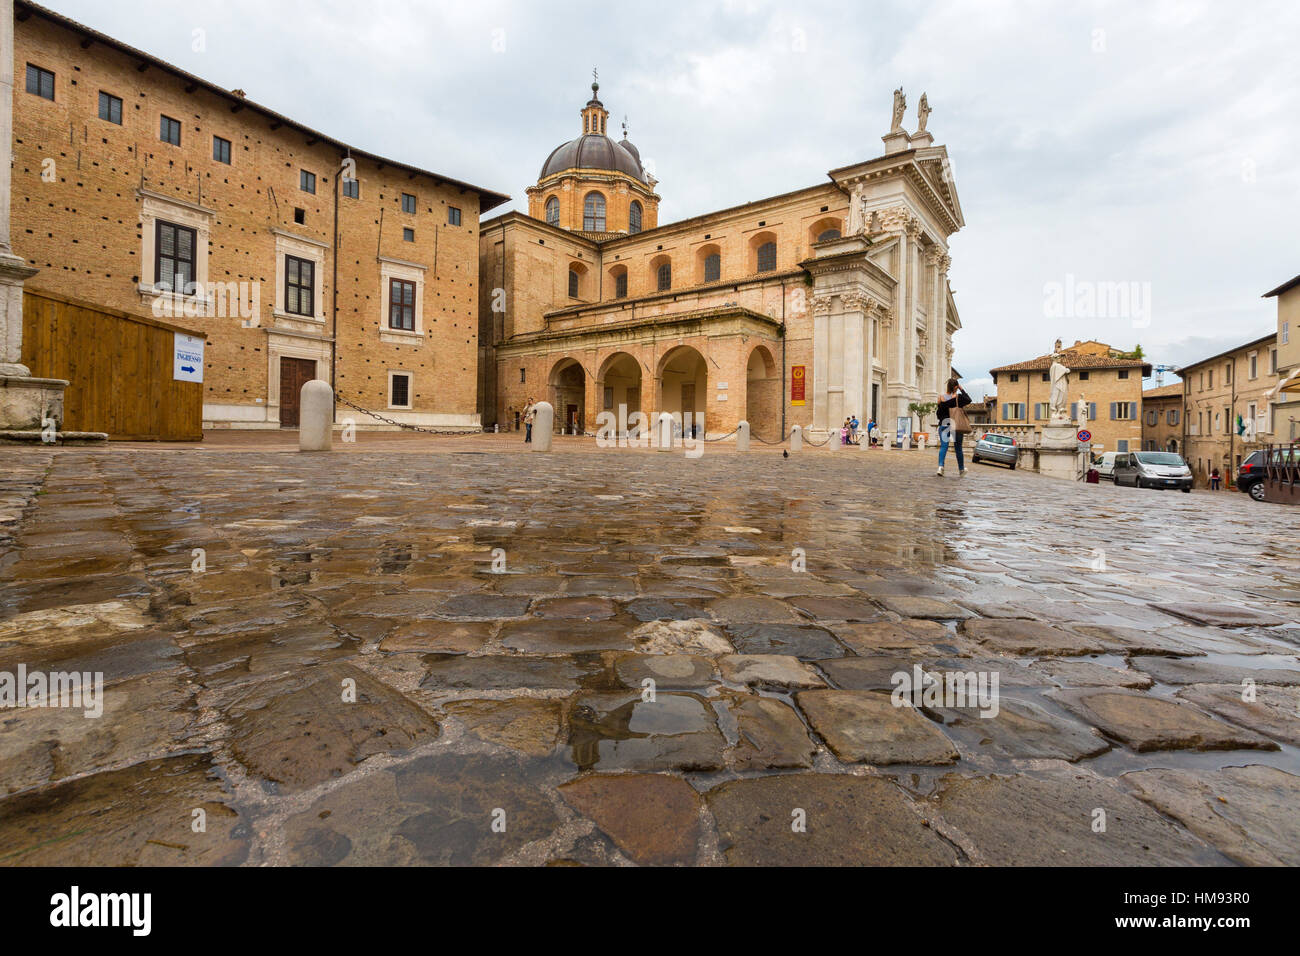 View of the arcades beside the ancient Duomo and Palazzo Ducale, Urbino, Province of Pesaro, Marche, Italy Stock Photo